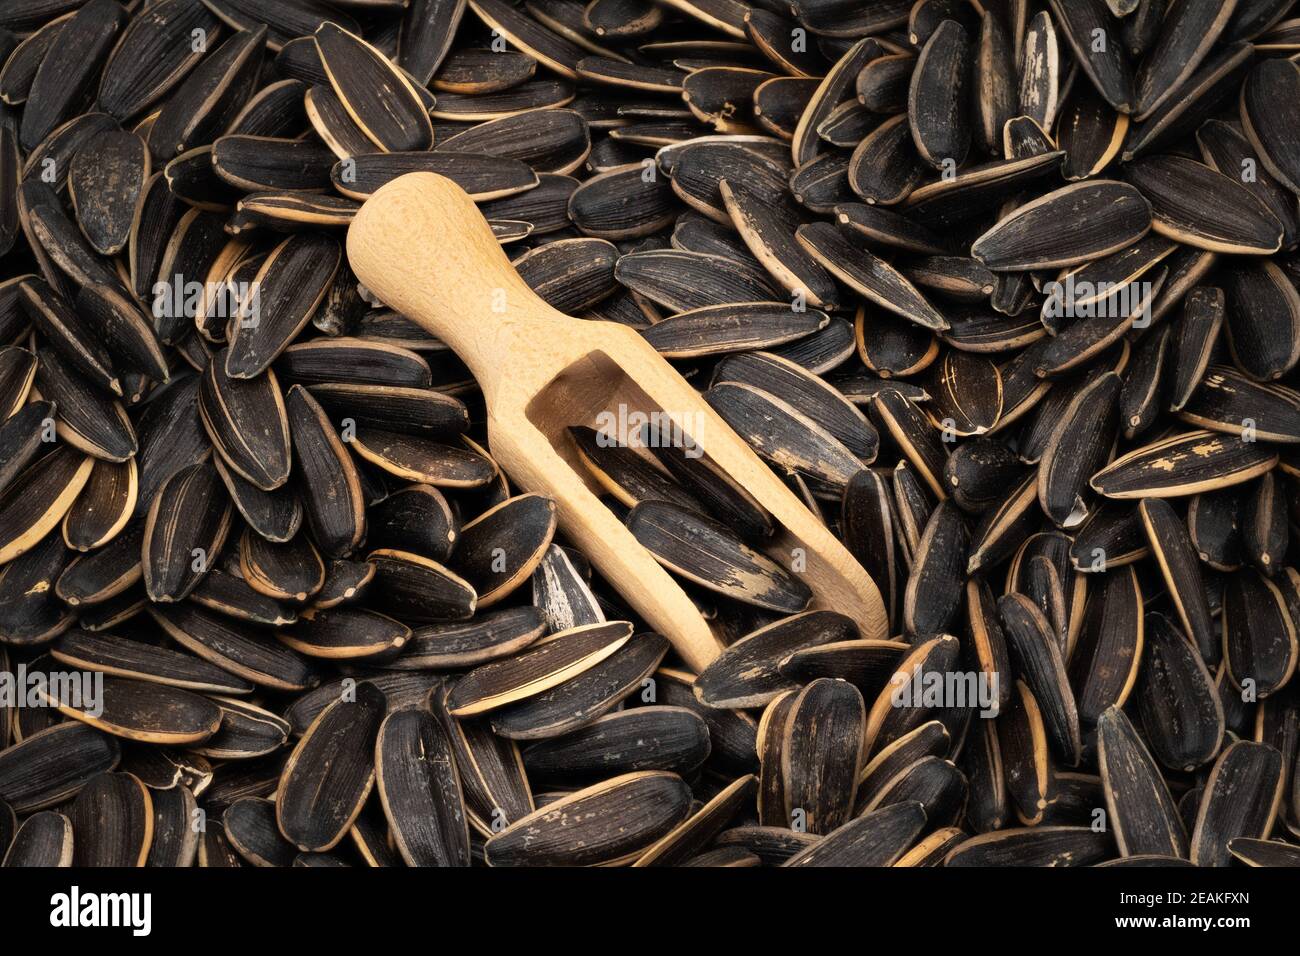 Sunflower Seed With Wooden Shovel Stock Photo